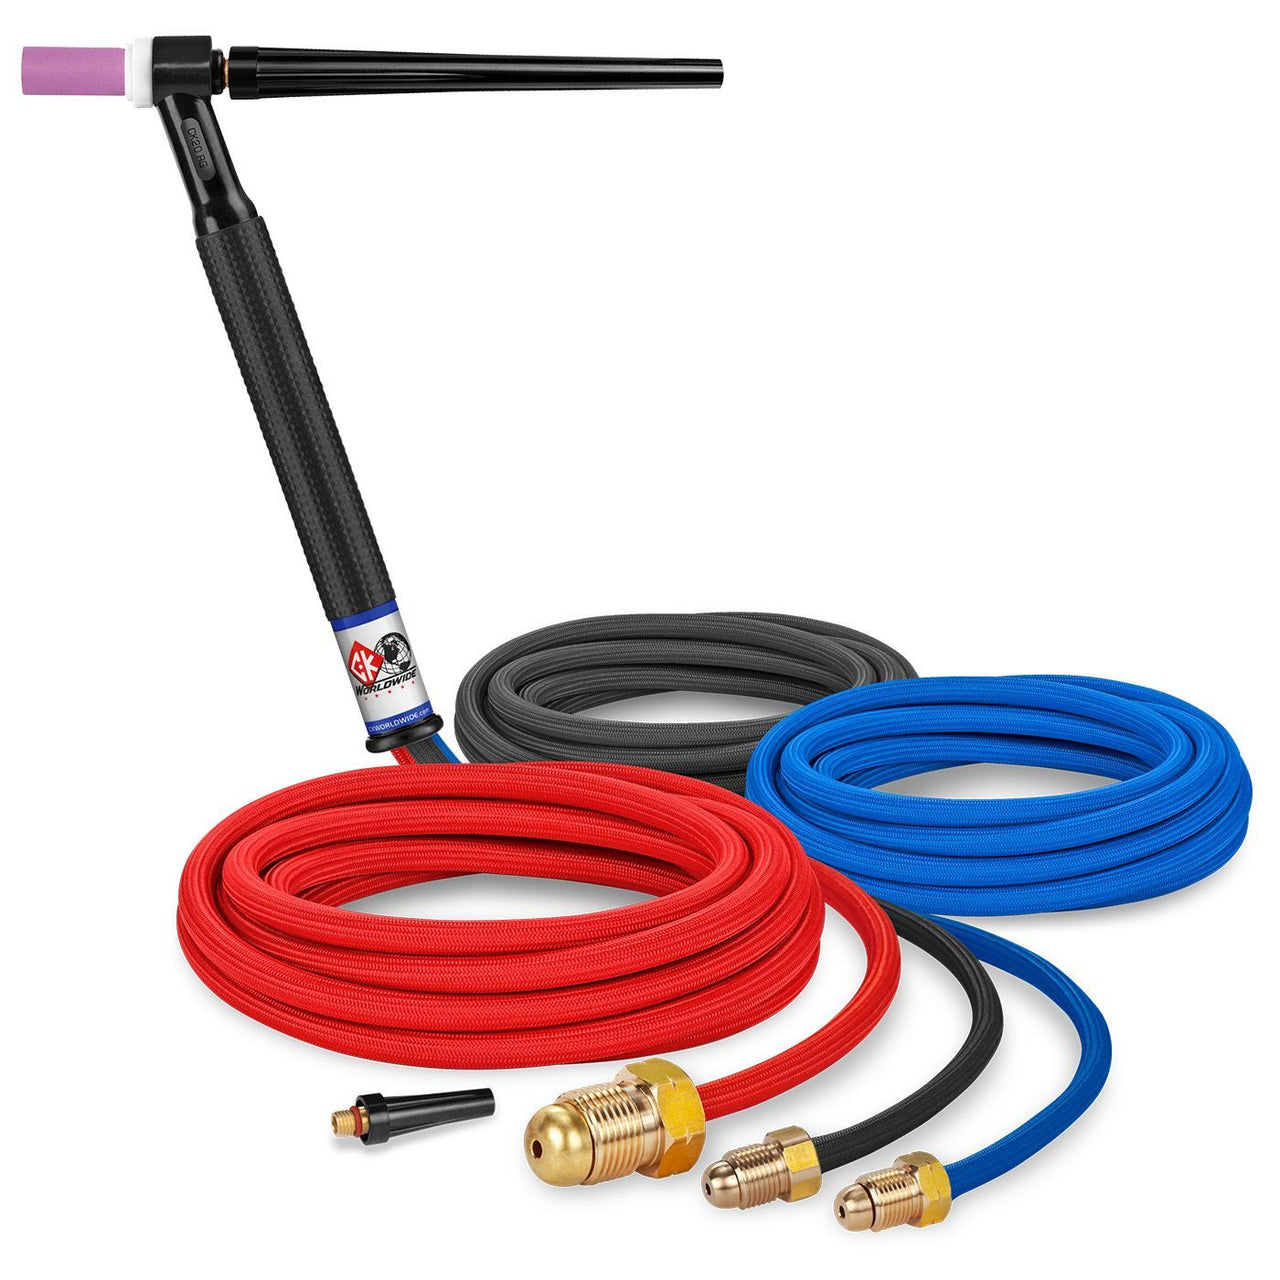 CK Worldwide | TIG Torch #20 - 2 Series (Water Cooled) (CK20-12SF FX) W/ 12.5ft. Super Flex Cable